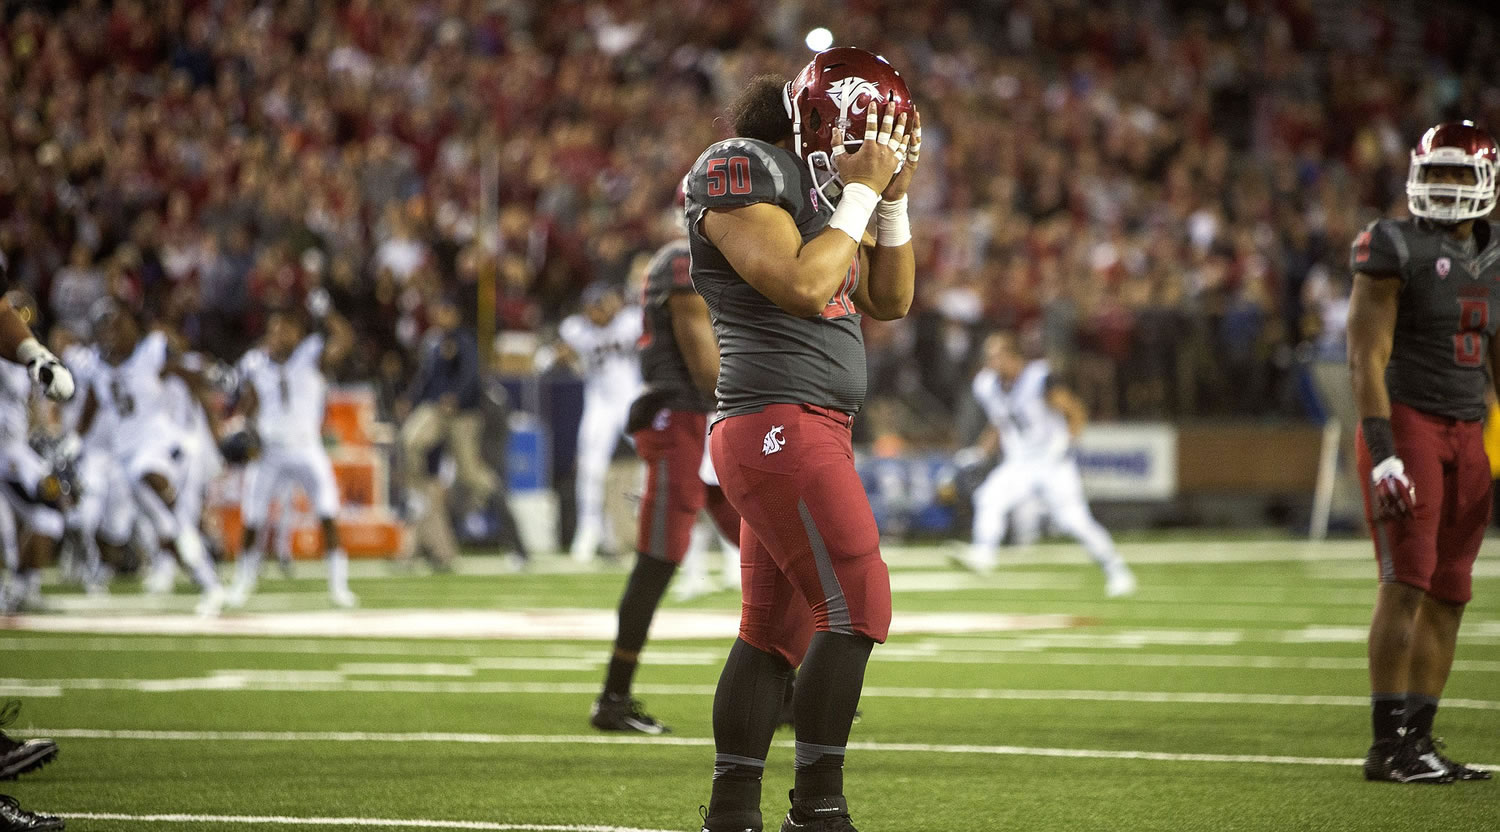 Washington State special teams blocker Lyman Faoliu (50) covers his face after while California players celebrate in the background after kicker Quentin Breshears missed a potential game-winning field goal with 15 seconds left Saturday, Oct. 4, 2014, at Martin Stadium in Pullman. California won 60-59.